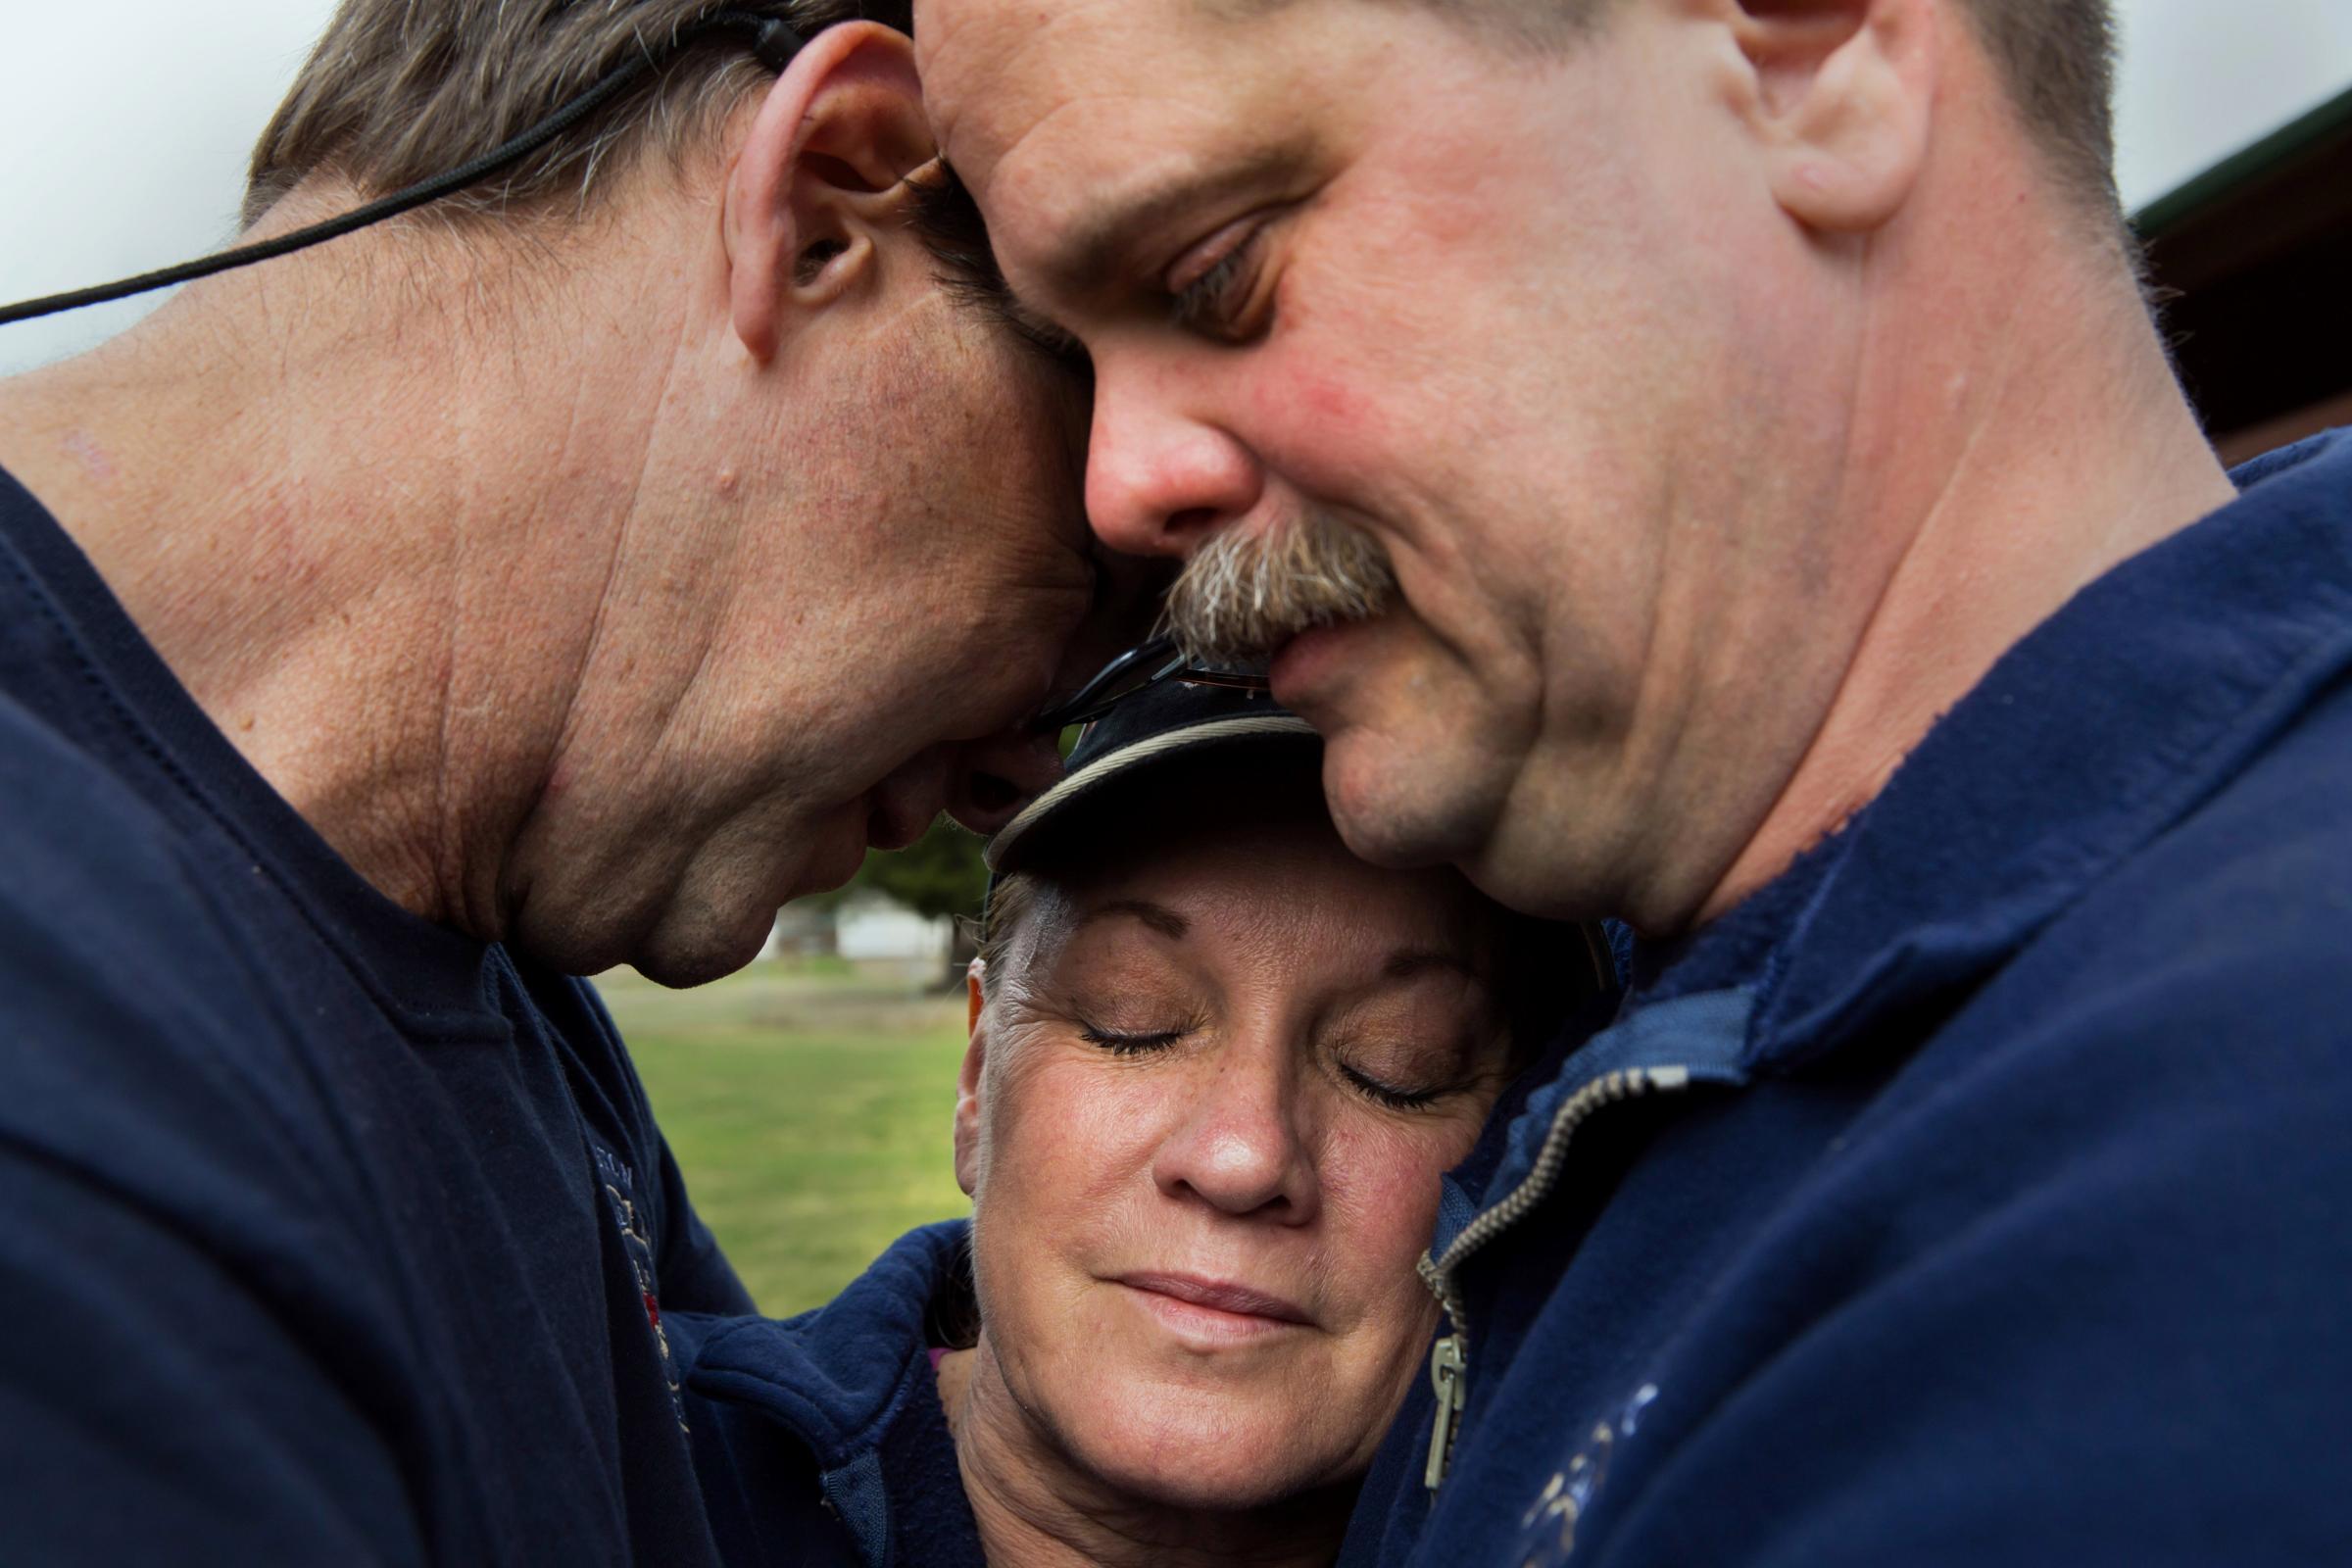 Darrington Fire District 24 volunteer firefighters, Jeff McClelland, left, Jan McClelland, center, and Eric Finzimer embrace each other, March 26, 2014, in Darrington, Wash., after saying a prayer for the victims and survivors of the massive mudslide.